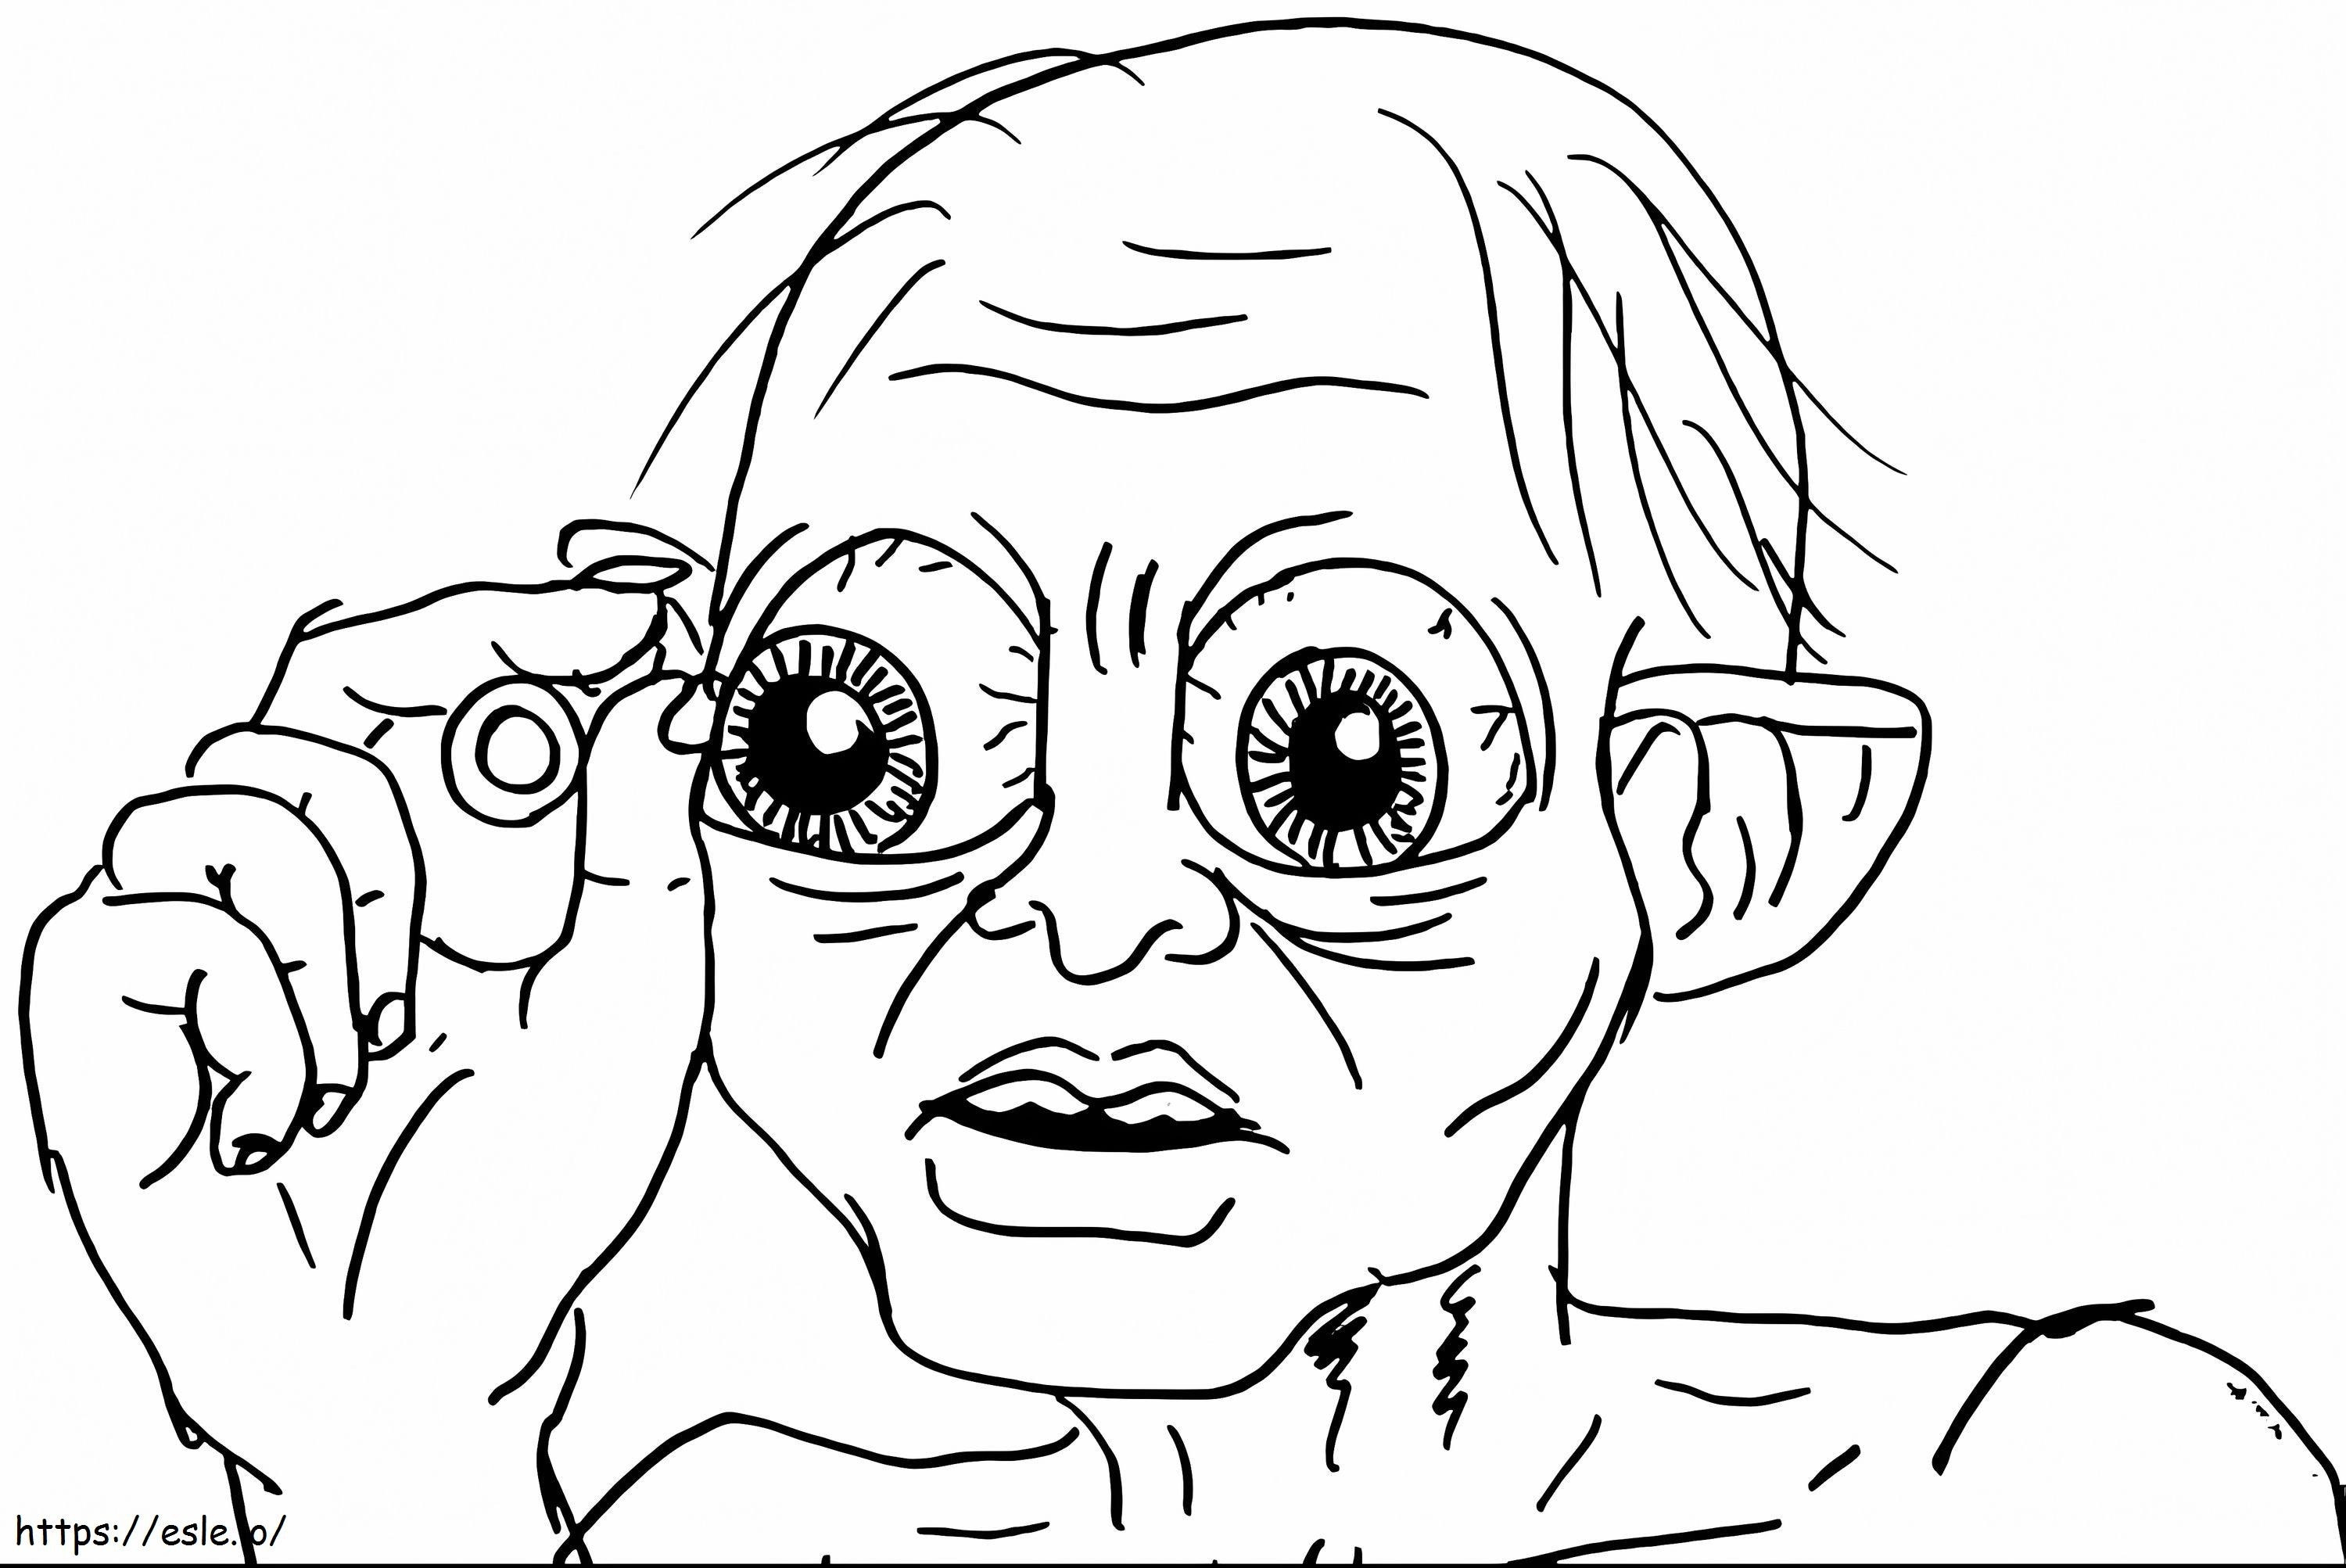 Uggly Gollum coloring page